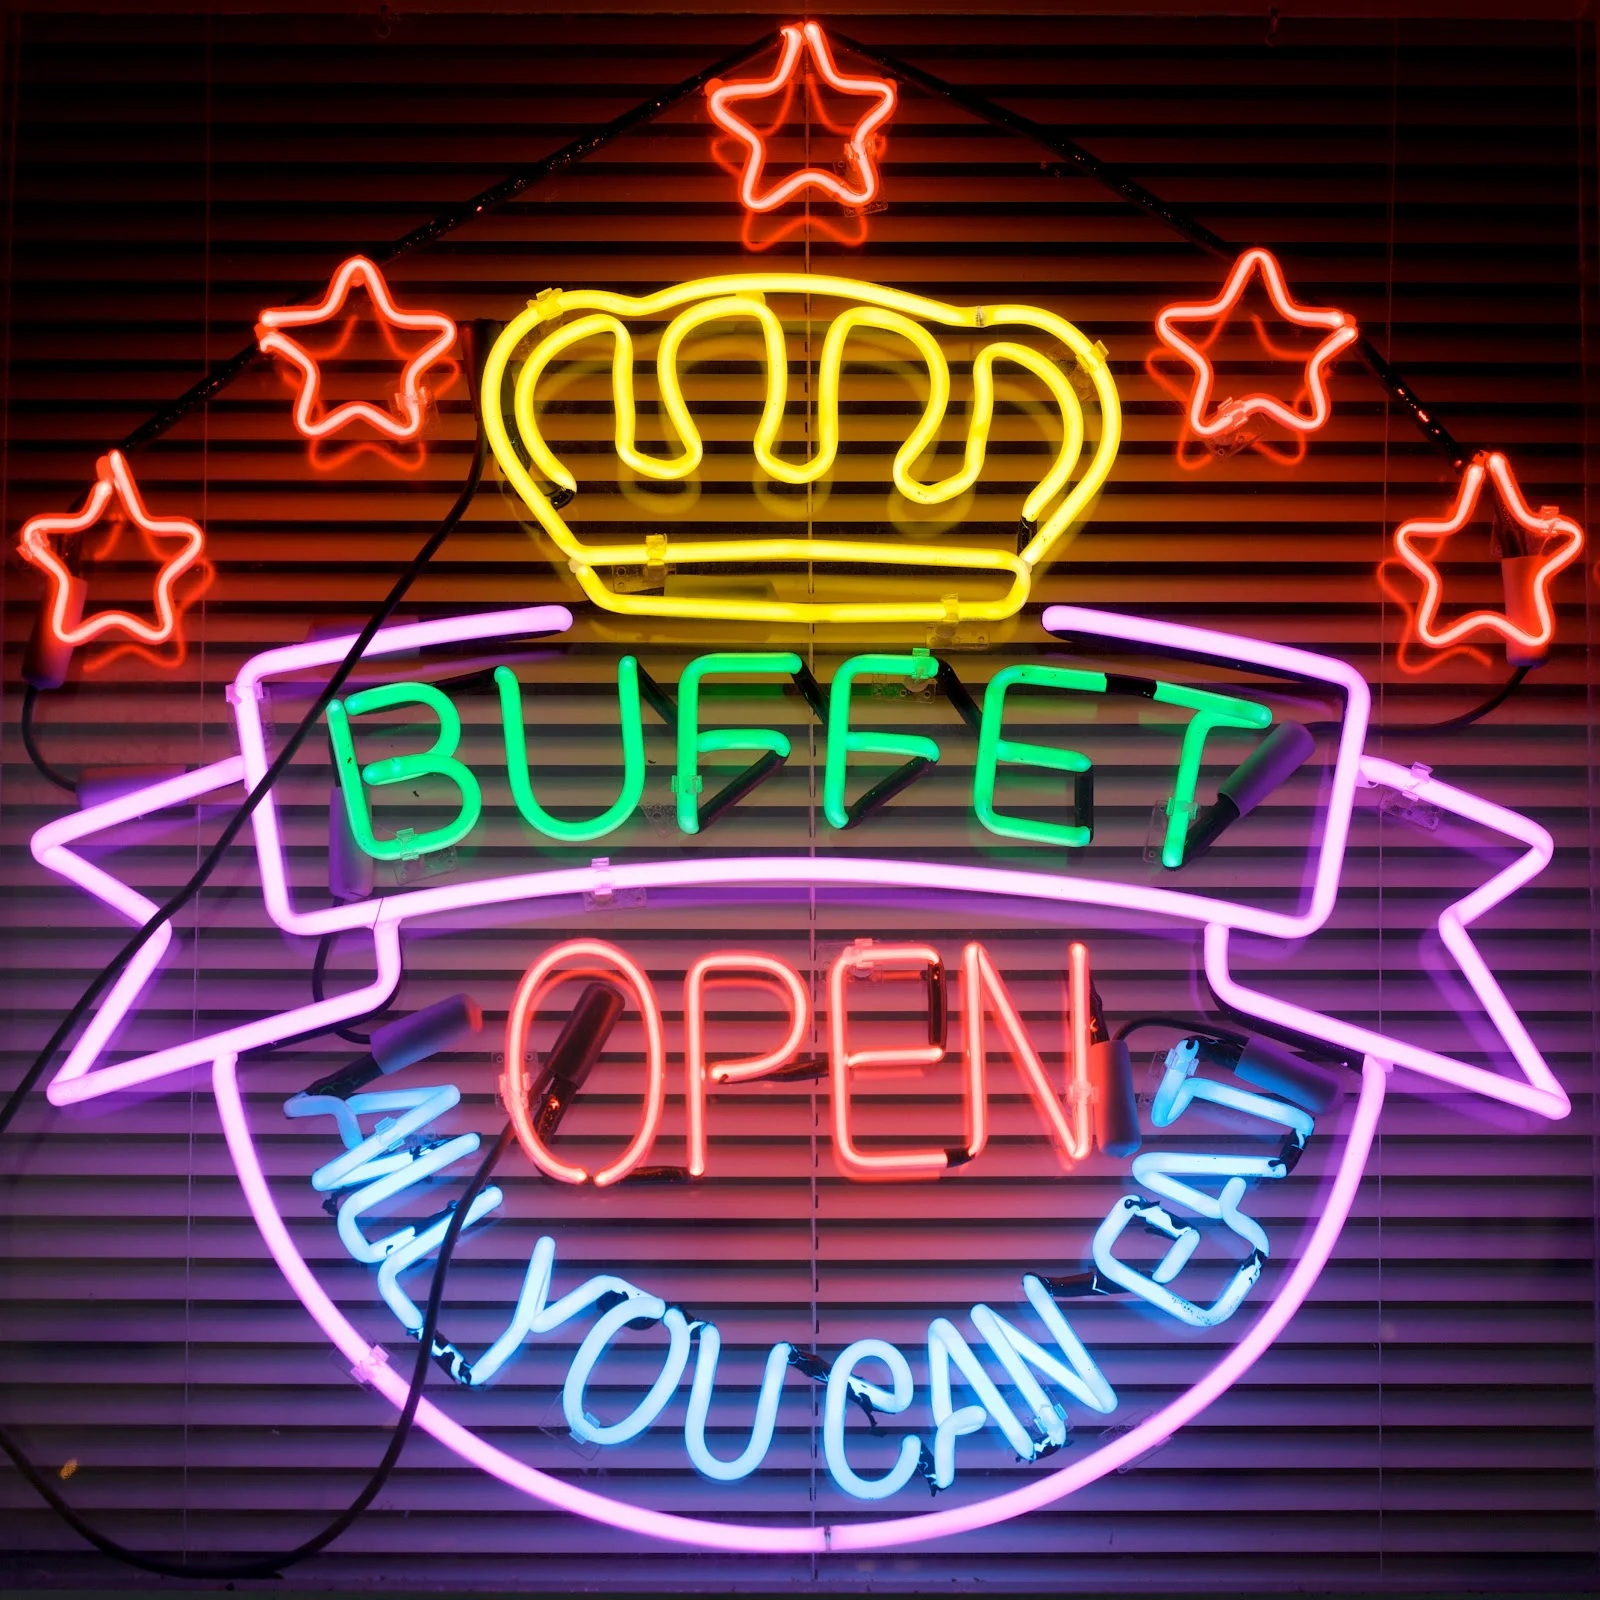 American and European Buffet in Angeles City, Philippines